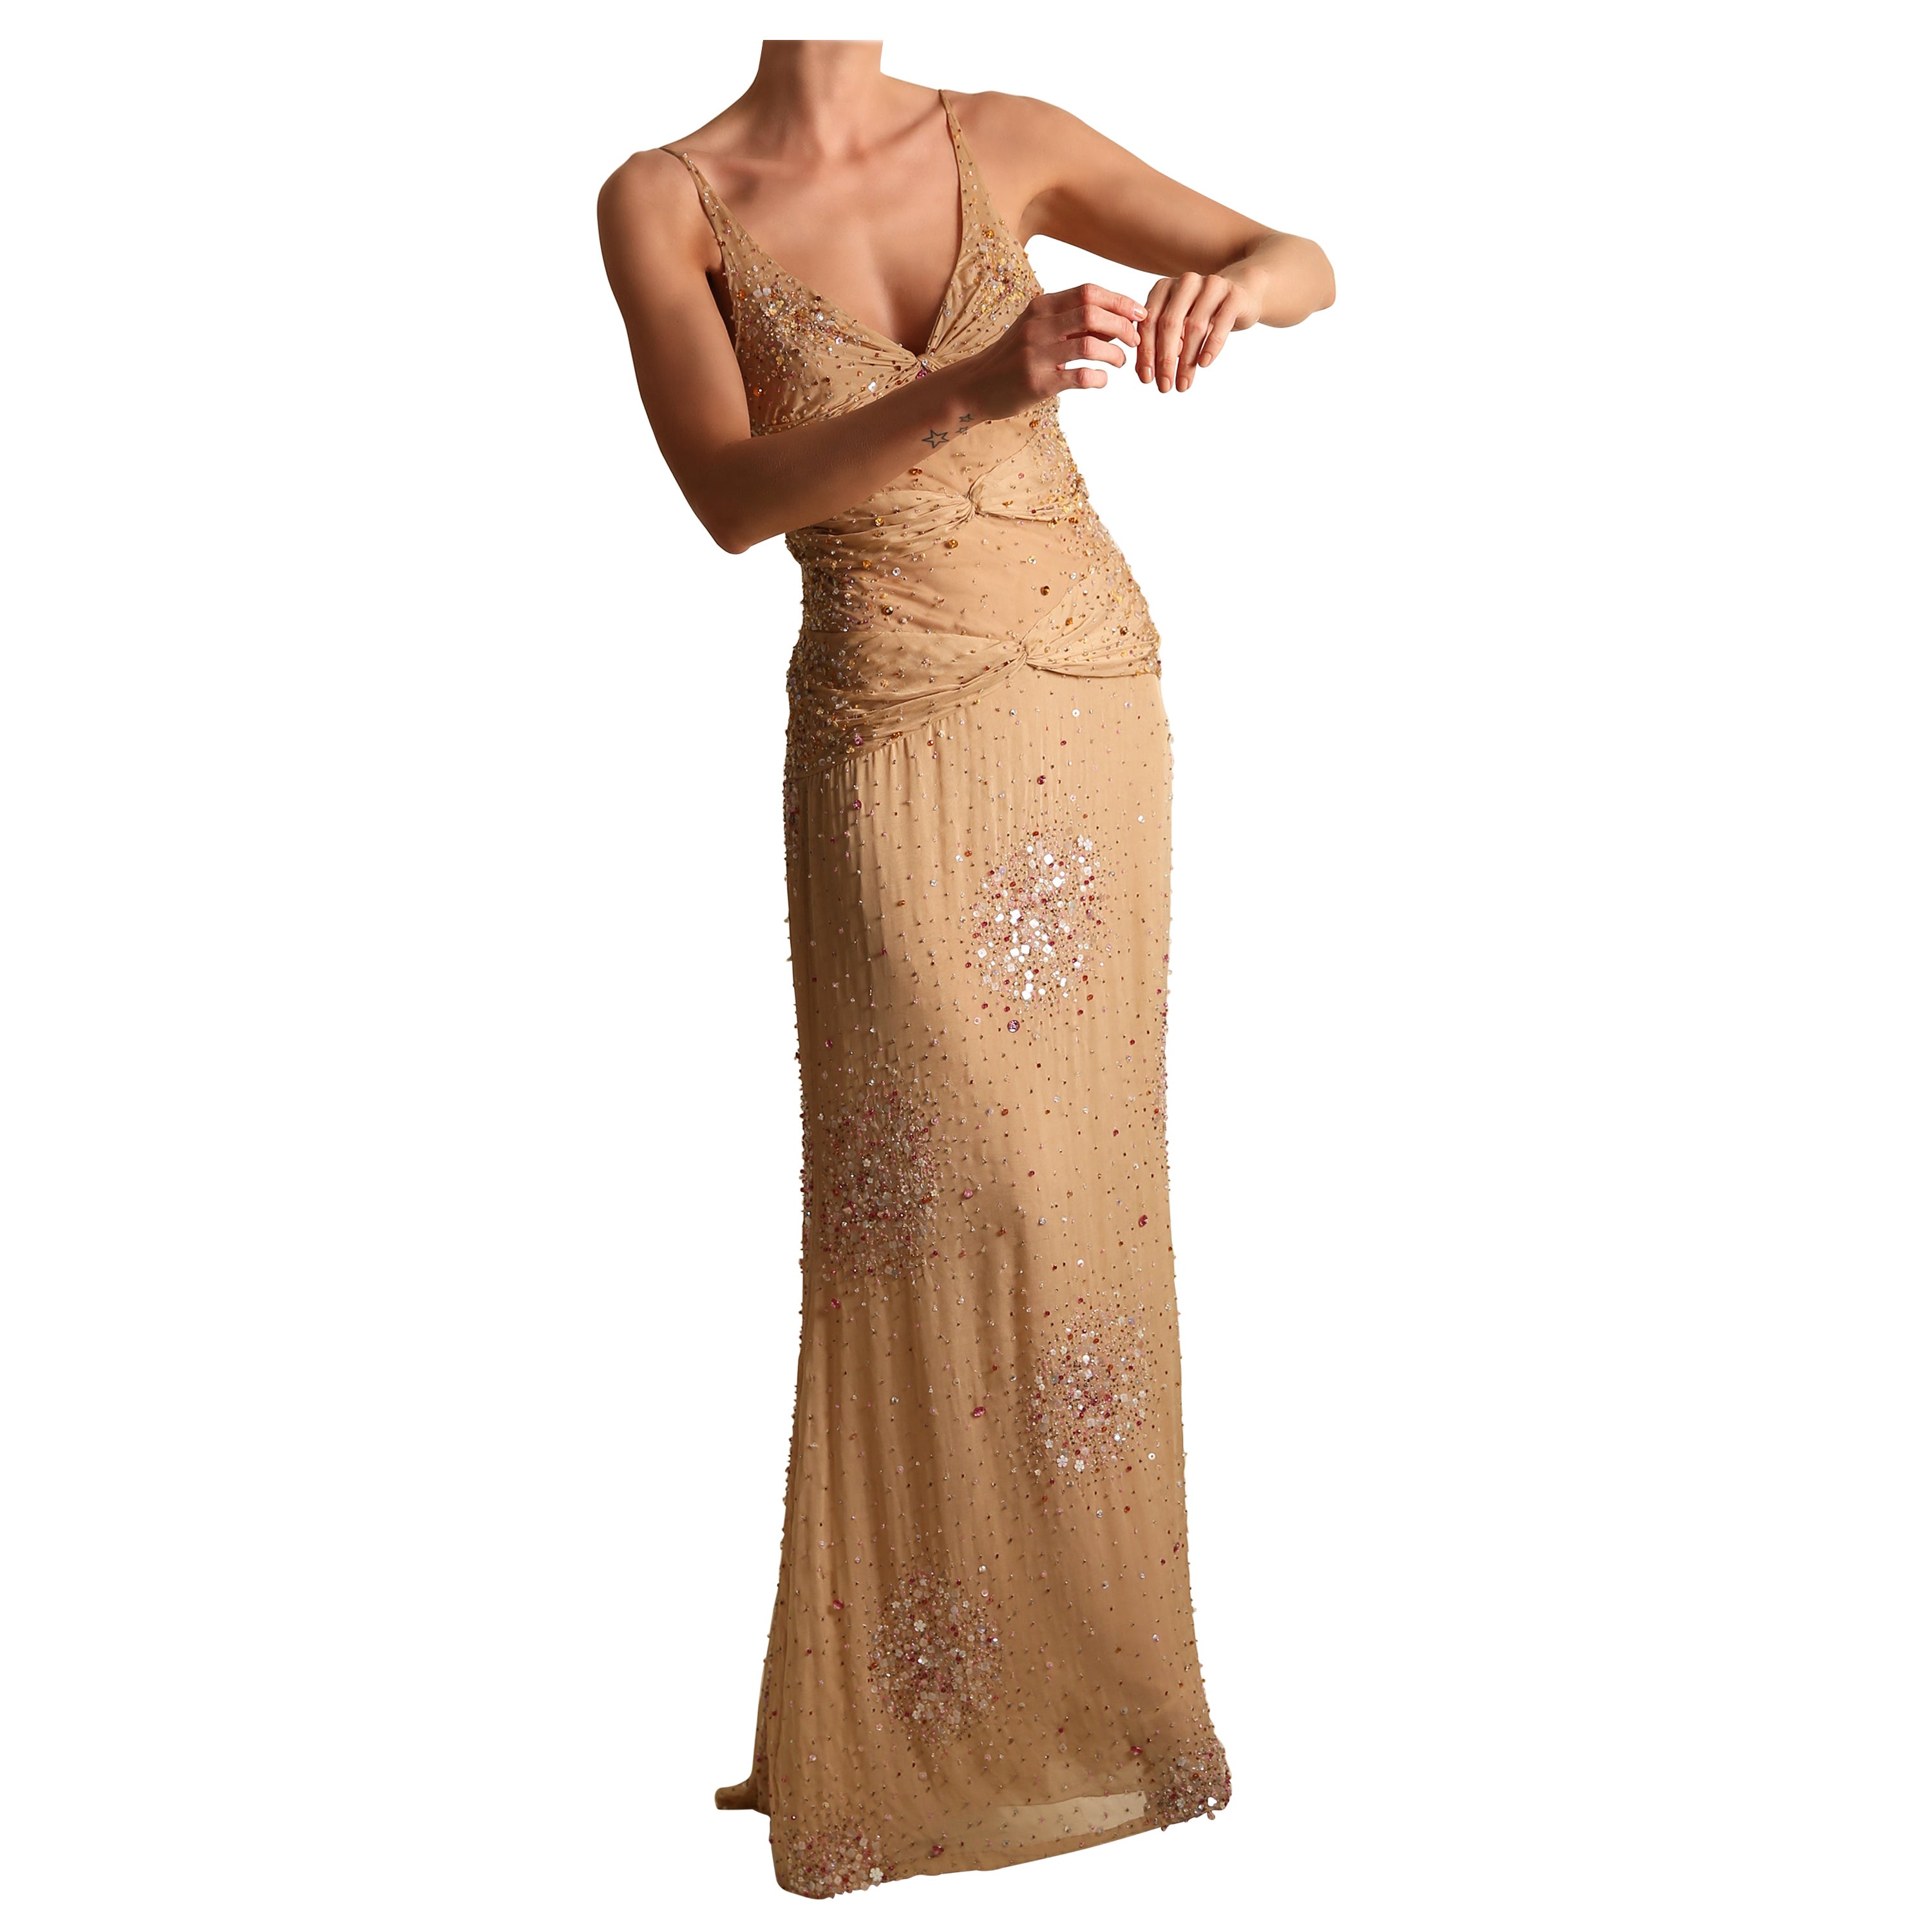 Vintage Valentino SS01 nude cut out sheer sequin embellished plunging dress gown